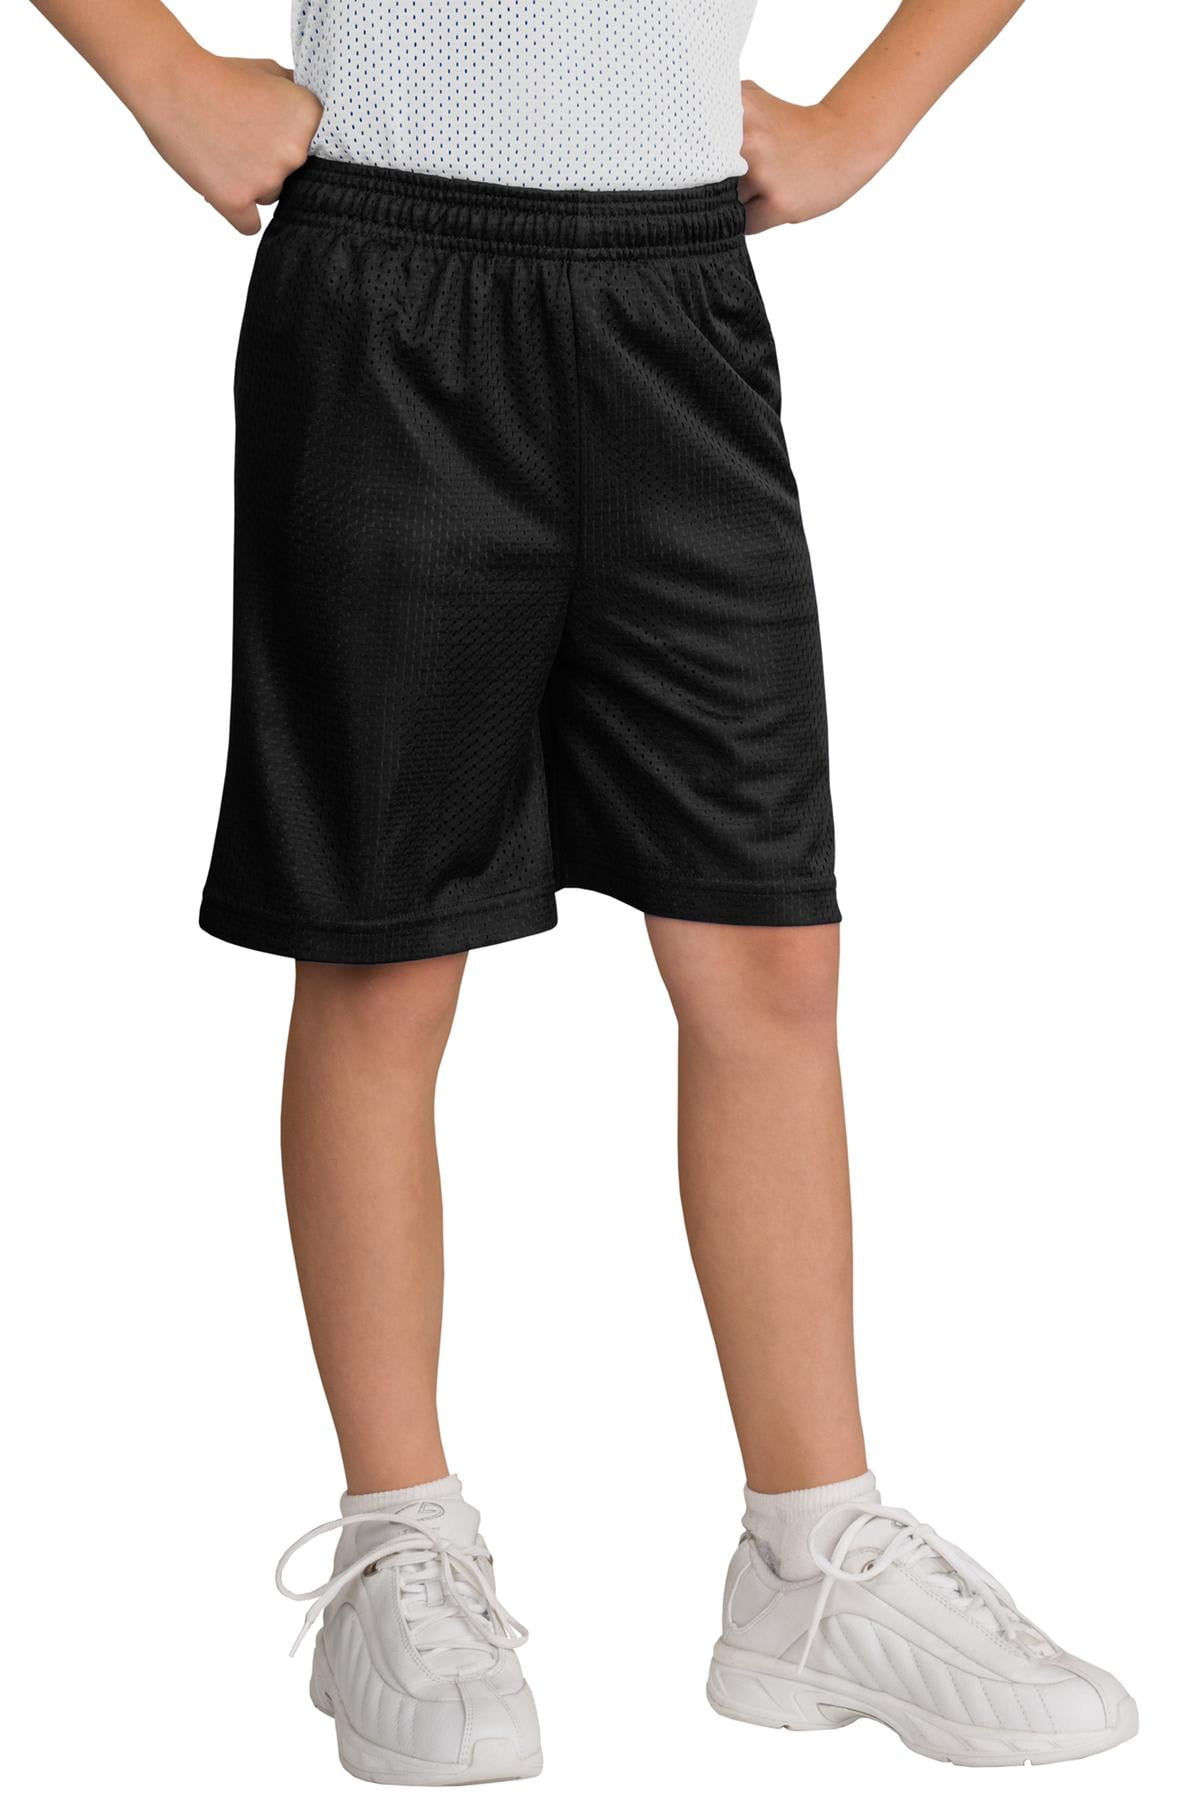  Outerstuff NBA Big Boys Youth (8-20) Free Throw Shorts